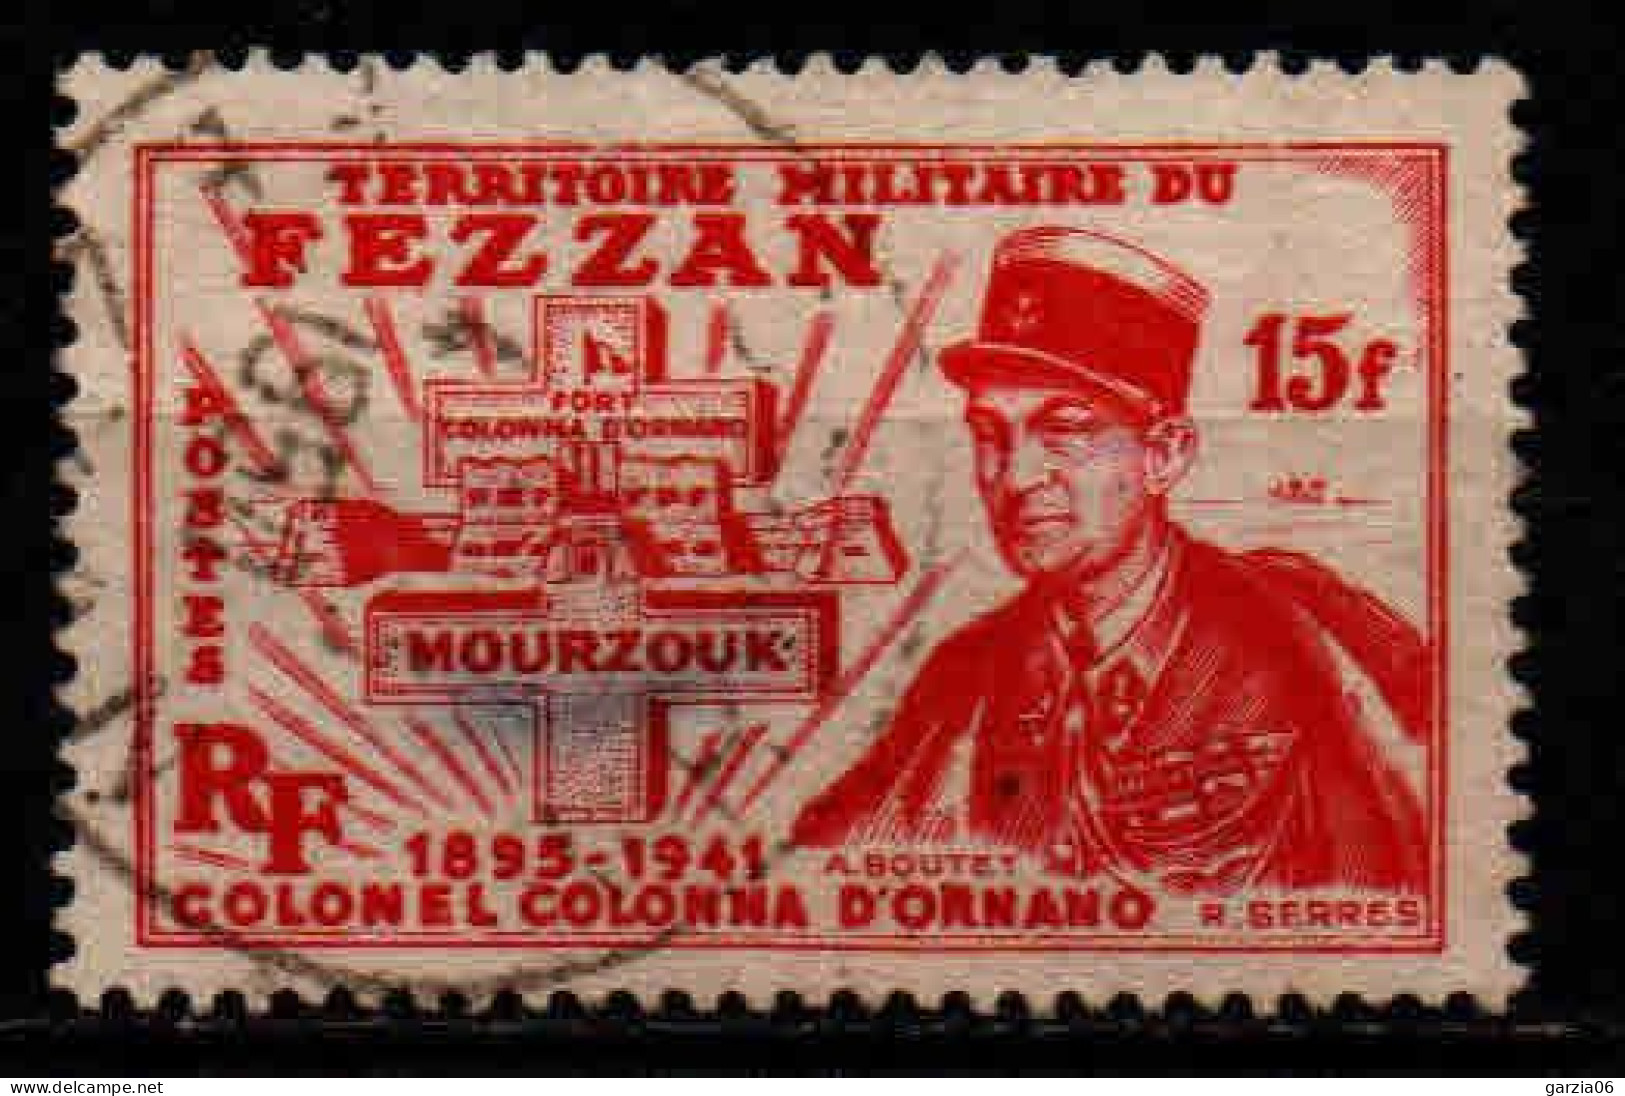 Fezzan  - 1949 - Col Colonna D' Ornano - N° 50 - Oblit - Used - Used Stamps